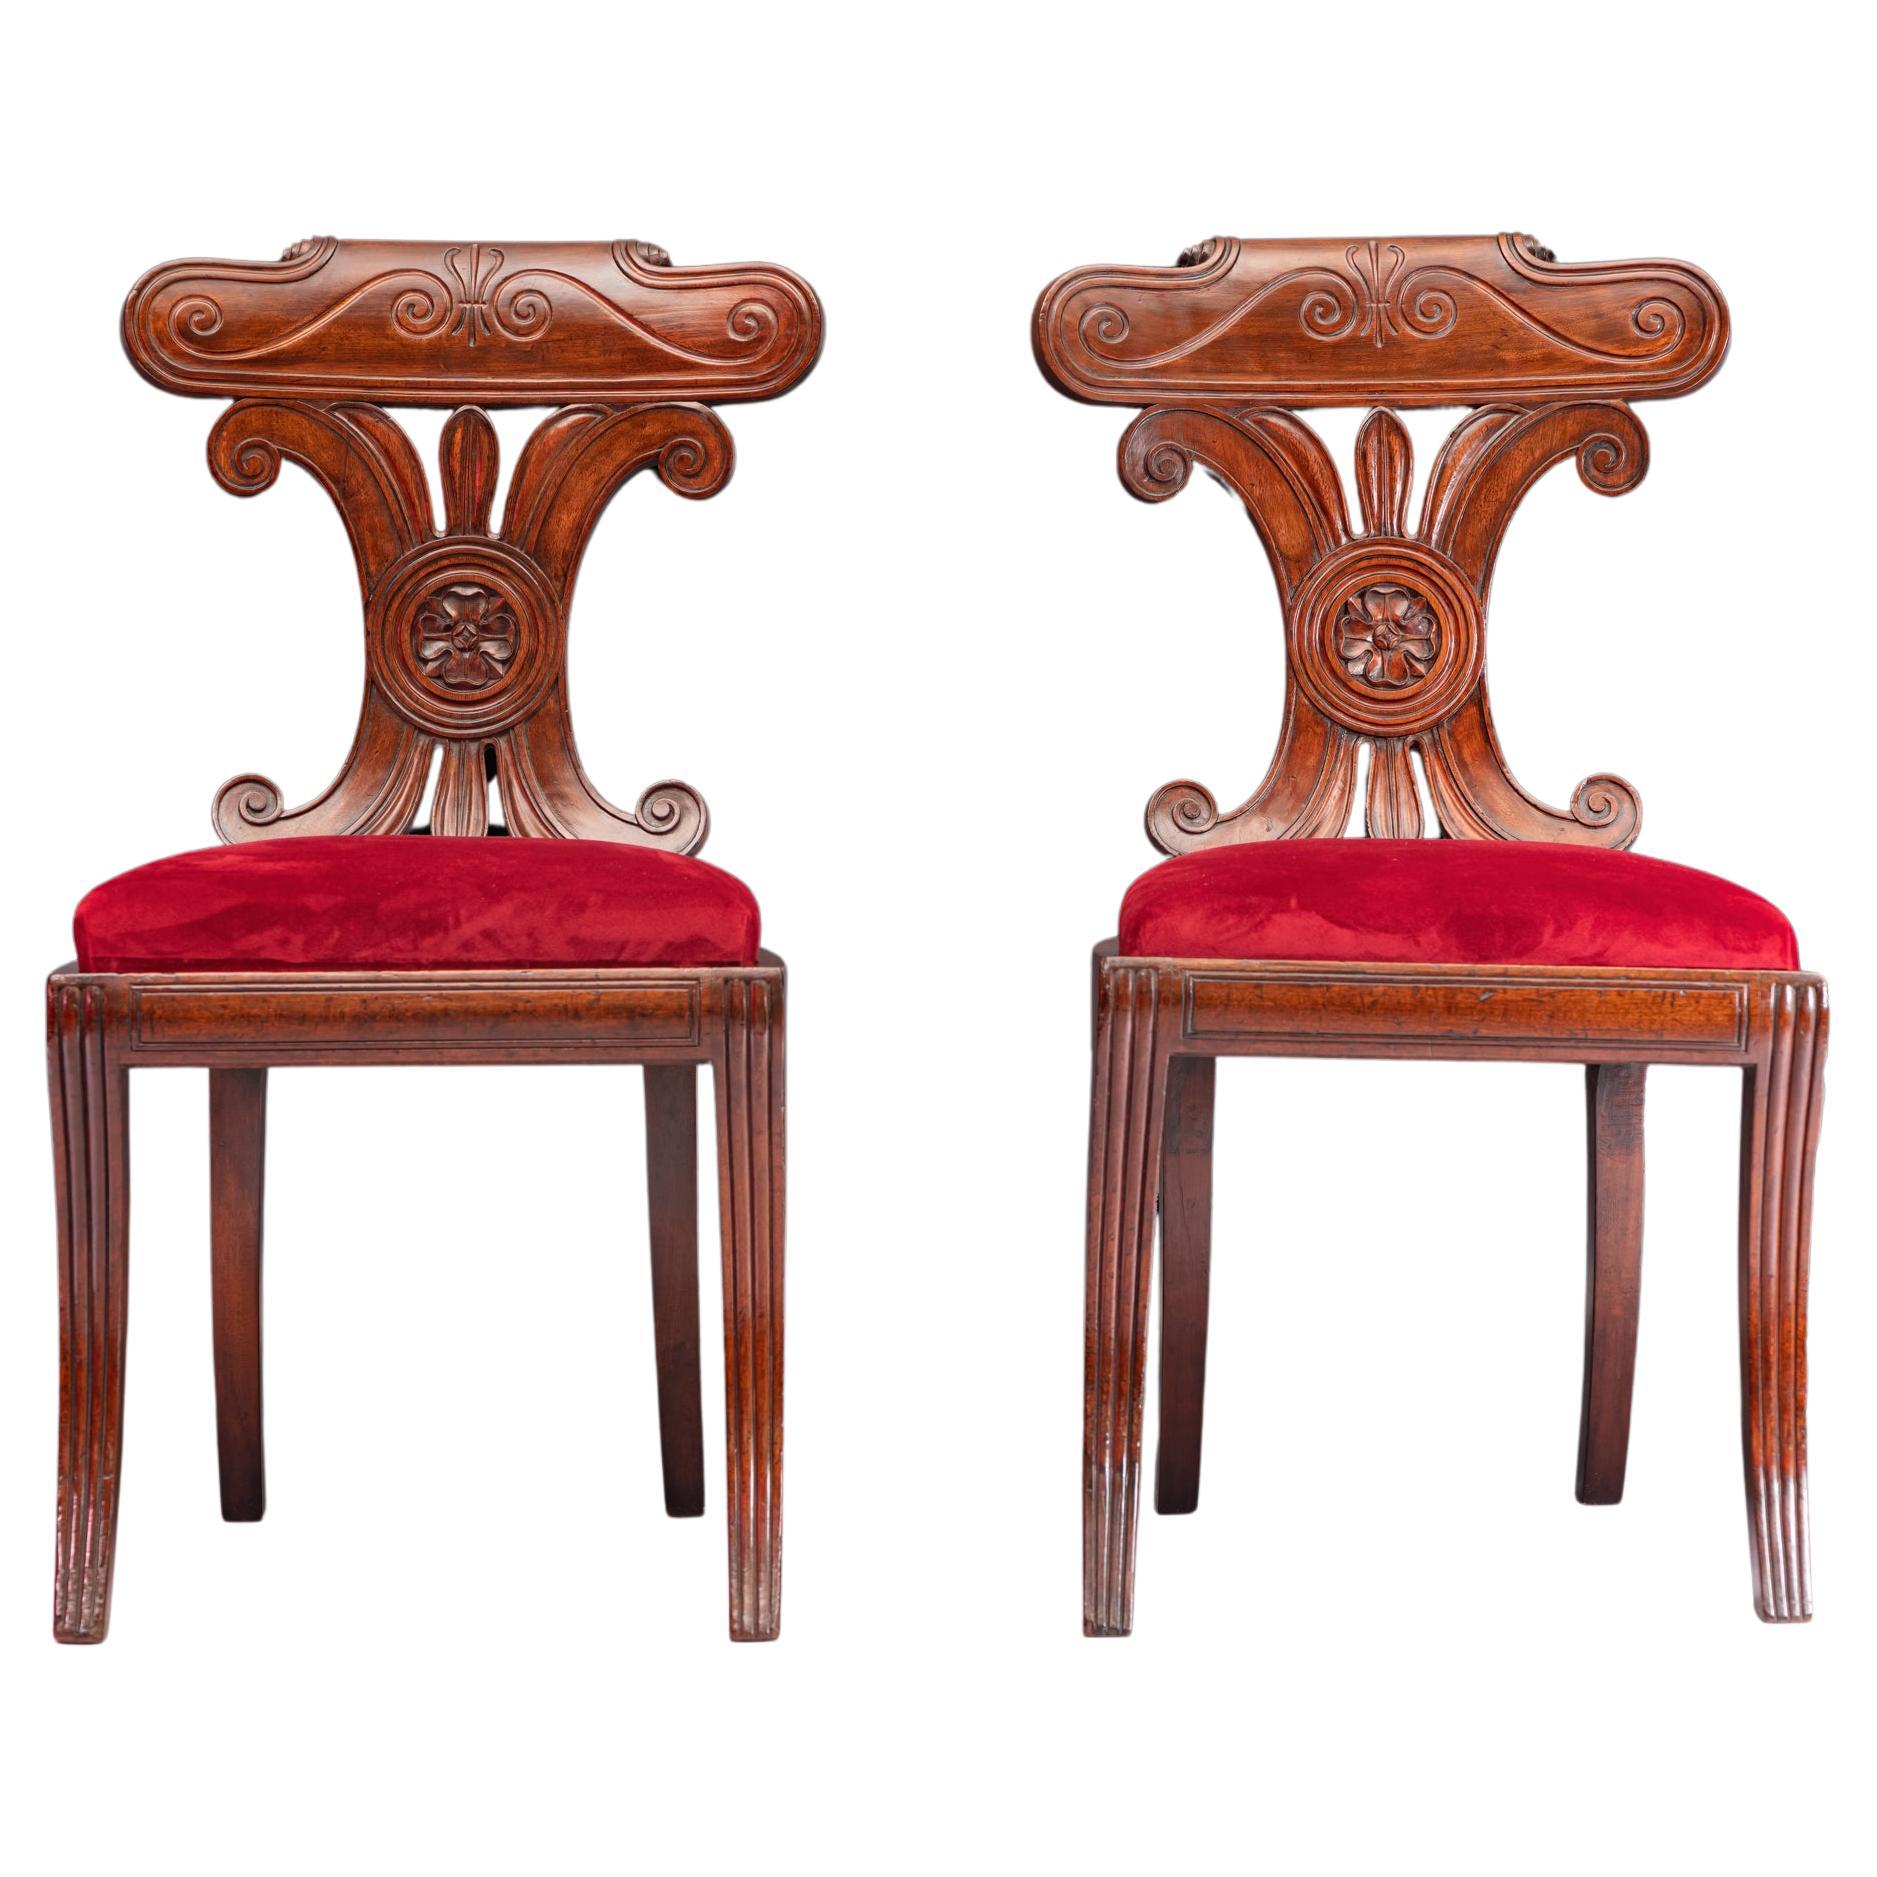 Pair Of Early 19th Century Irish Neo-Grecian Style Regency Side / Hall Chairs For Sale